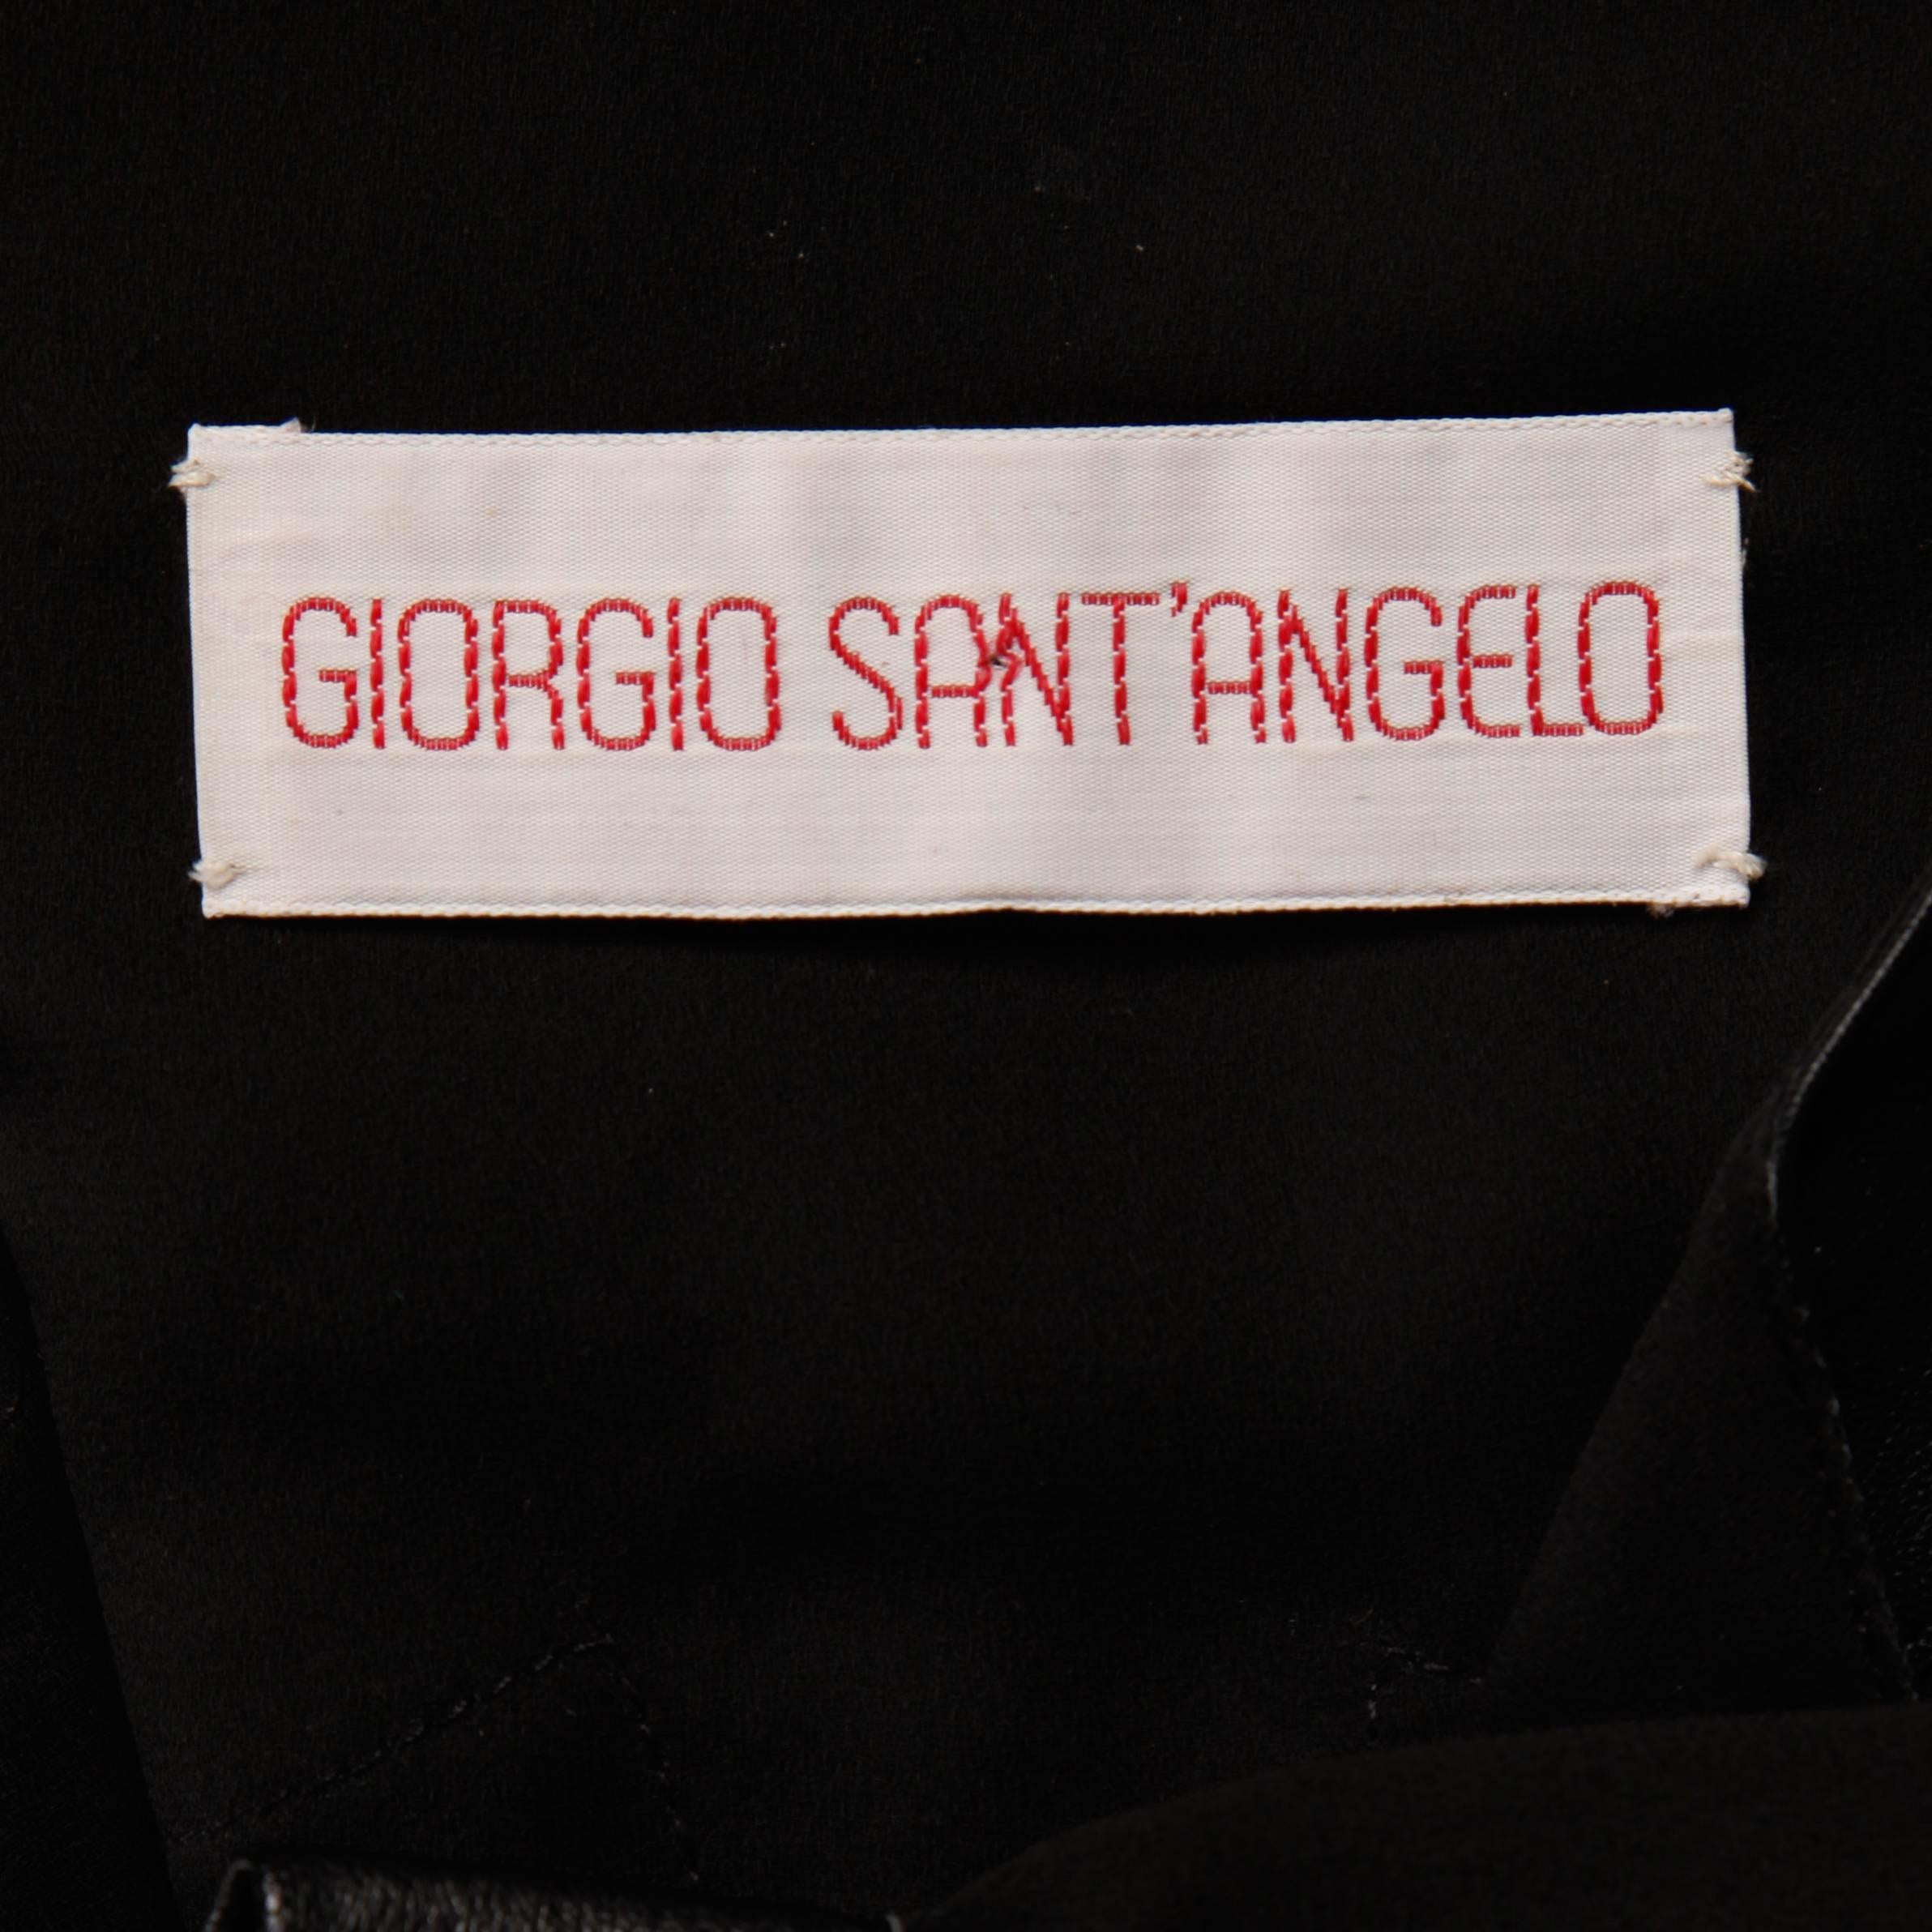 Slightly sheer button up blouse with black leather patchwork detail by Giorgio Sant'Angelo. Unlined with front snap closure. Fits like a modern size small-medium. The bust measures 40", waist 40", hips 41", shoulders 15.5",